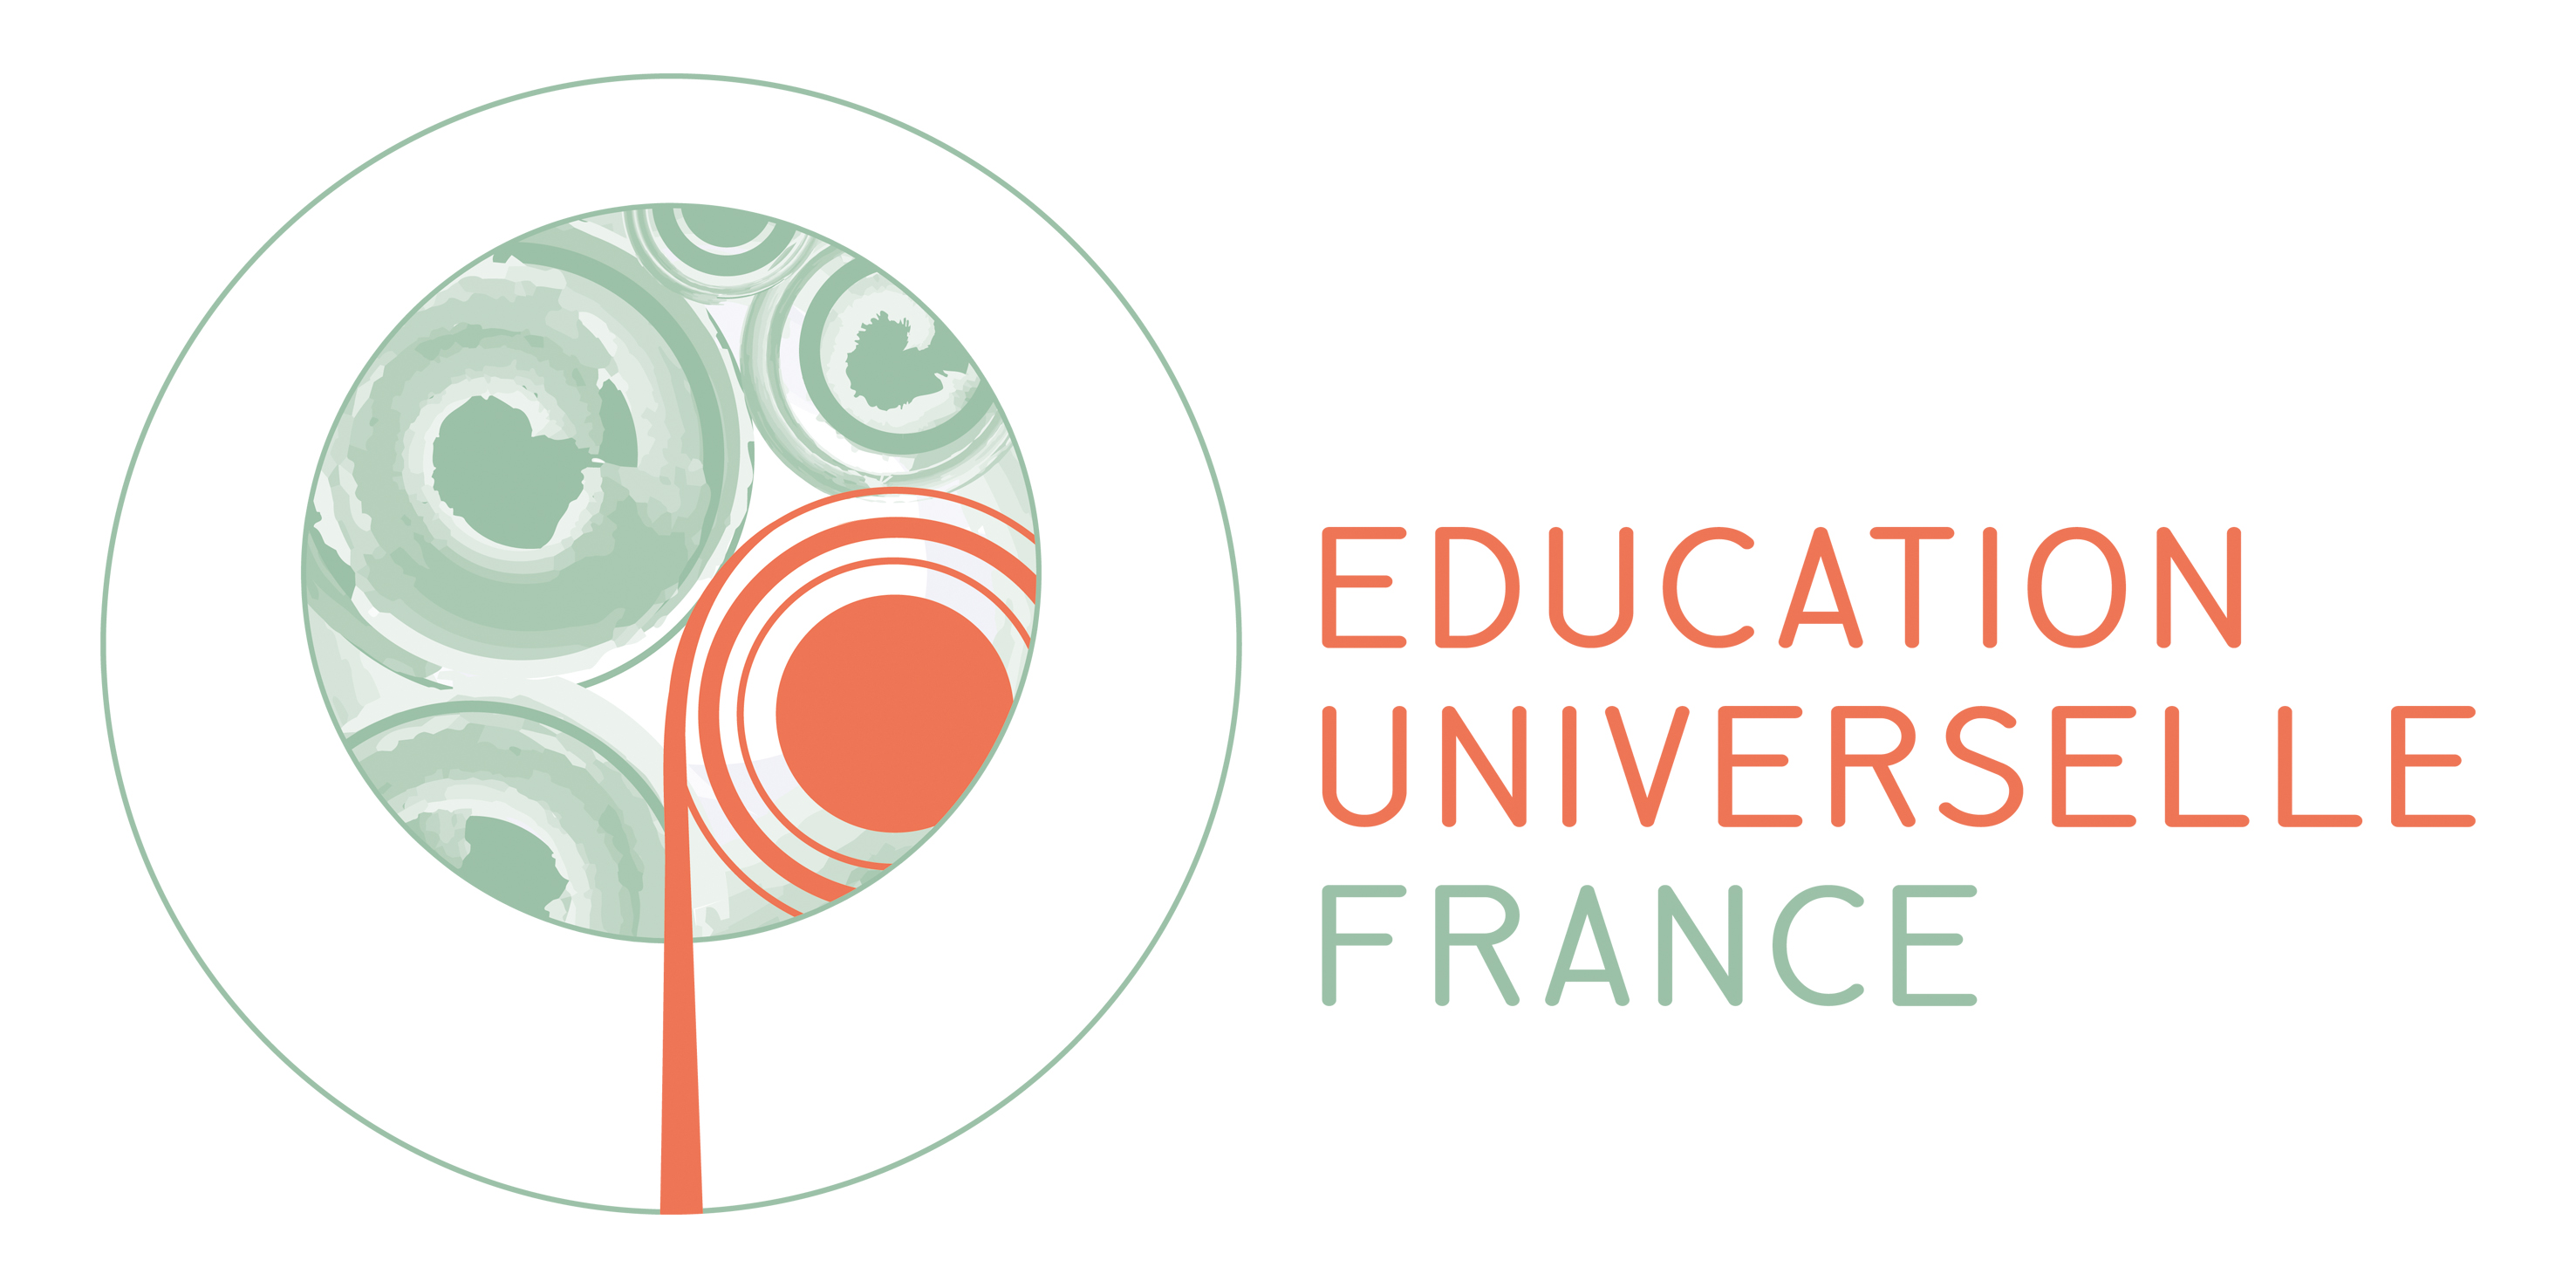 Education Universelle France